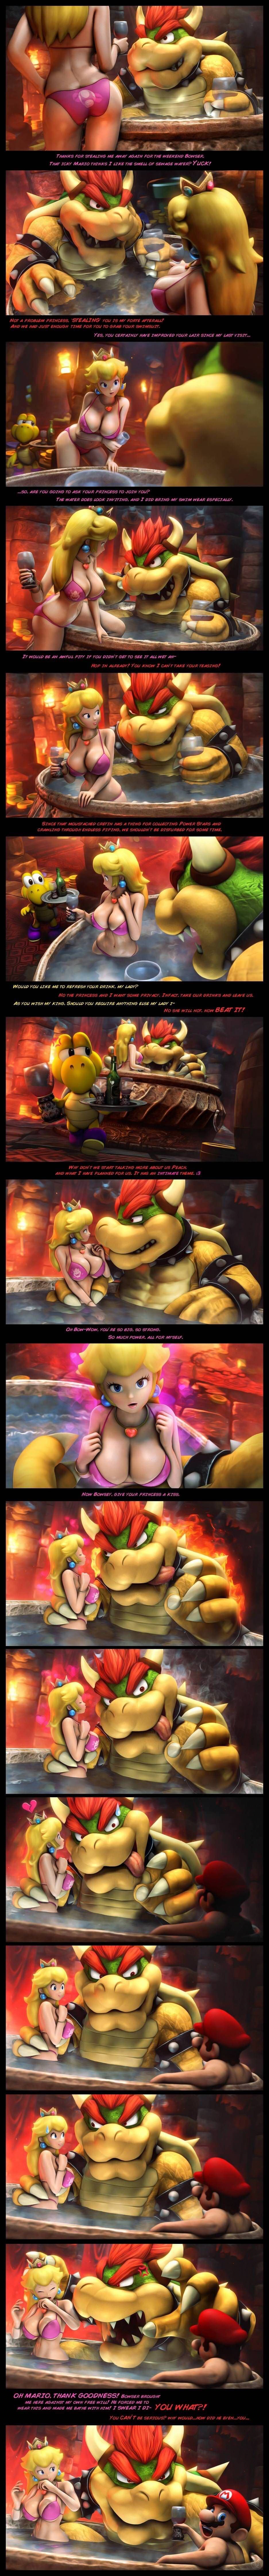 [With image] torture officer "pull out with erotic image of Mario's character" 2